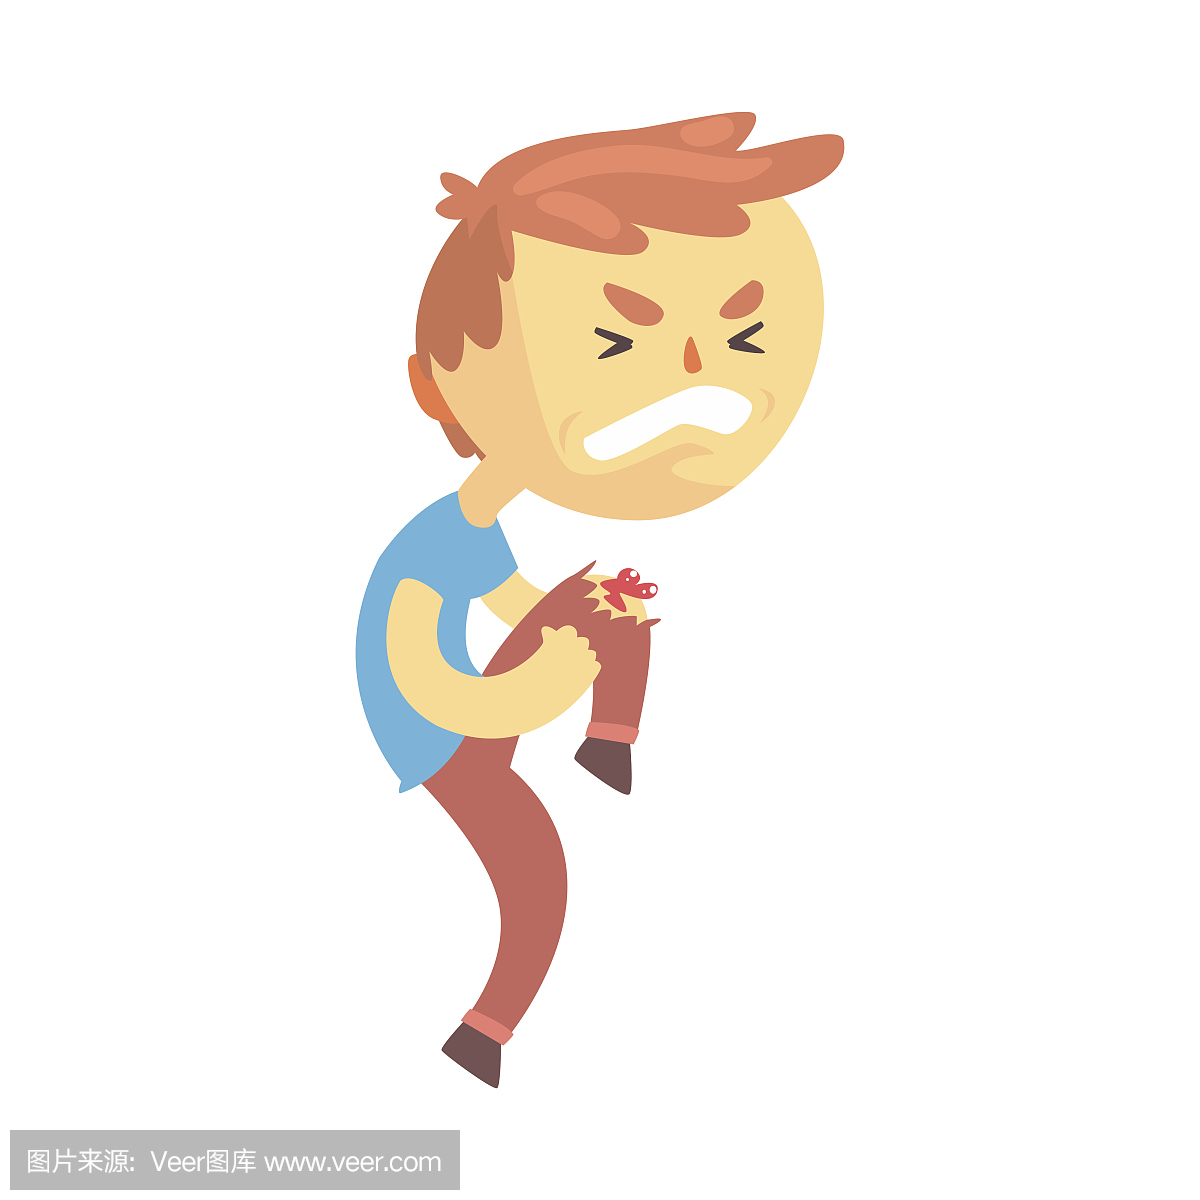 Boy character with wound on his knee cartoon v